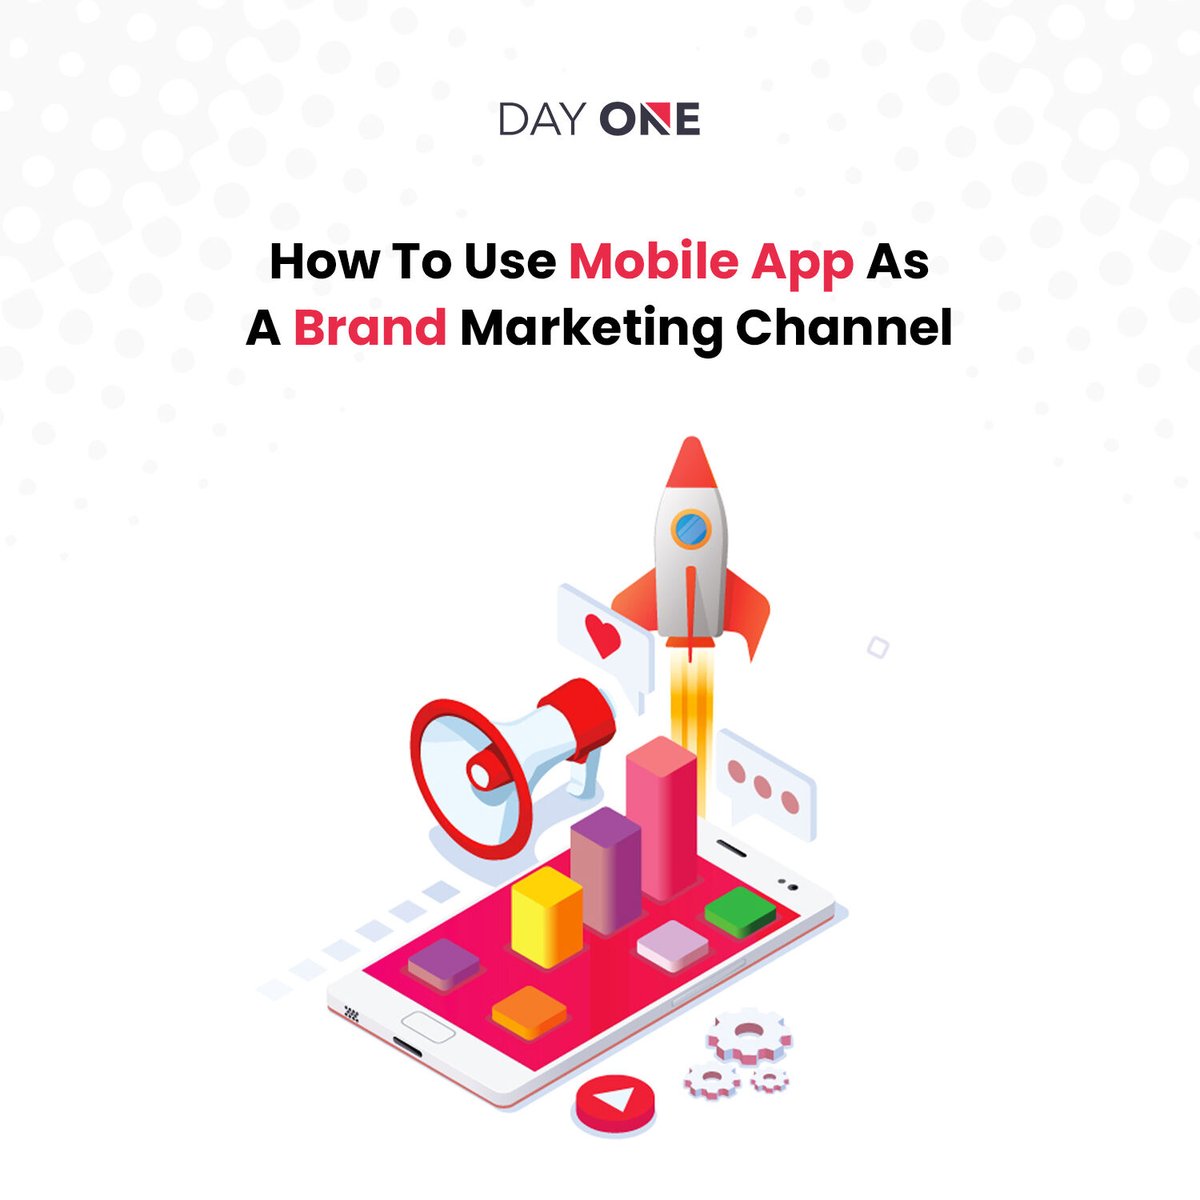 If you are perplexed about your brand marketing and would like to know how to use Mobile Apps for Marketing? We are the right choice for you. tinyurl.com/mph8ejm6 #mobileapps #brandmarketing #marketingchannels #appdevelopment #dayone #dayonetech